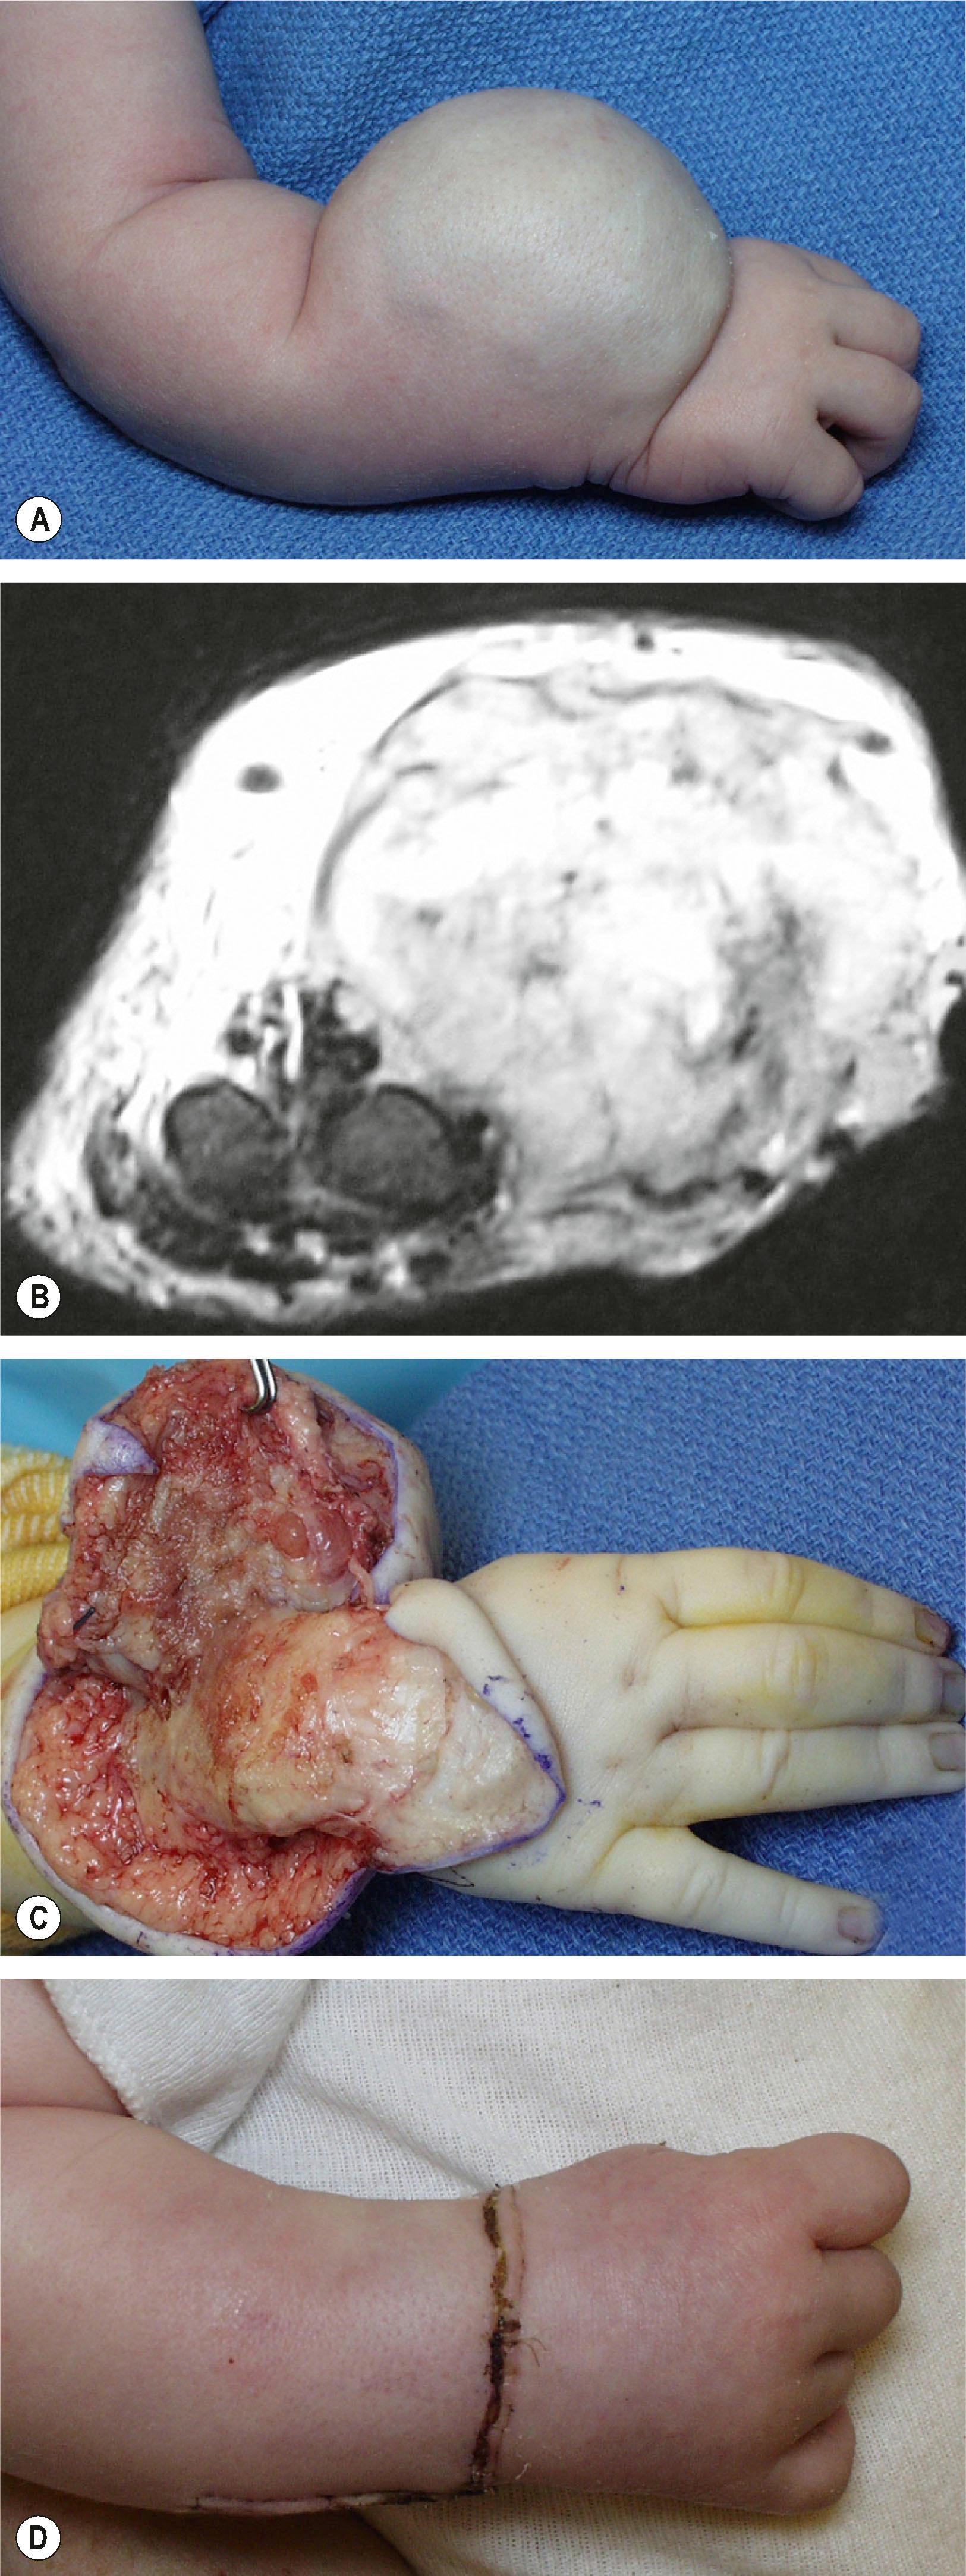 Figure 37.1, Infantile hemangioma (IH). (A) This well-localized, solitary IH on the dorsal forearm has a bluish hue. (B) The MRI shows a multilobular, isointense lesion on T 2 -weighted images. (C) Excision included extensive dorsal tenosynovectomy. (D) Two weeks later active extension is initiated. Note the current first-line agent for systemic treatment of infantile hemangioma is oral propranolol. Surgery is reserved for non-responsive or noninvoluting lesions, or those that threaten function.